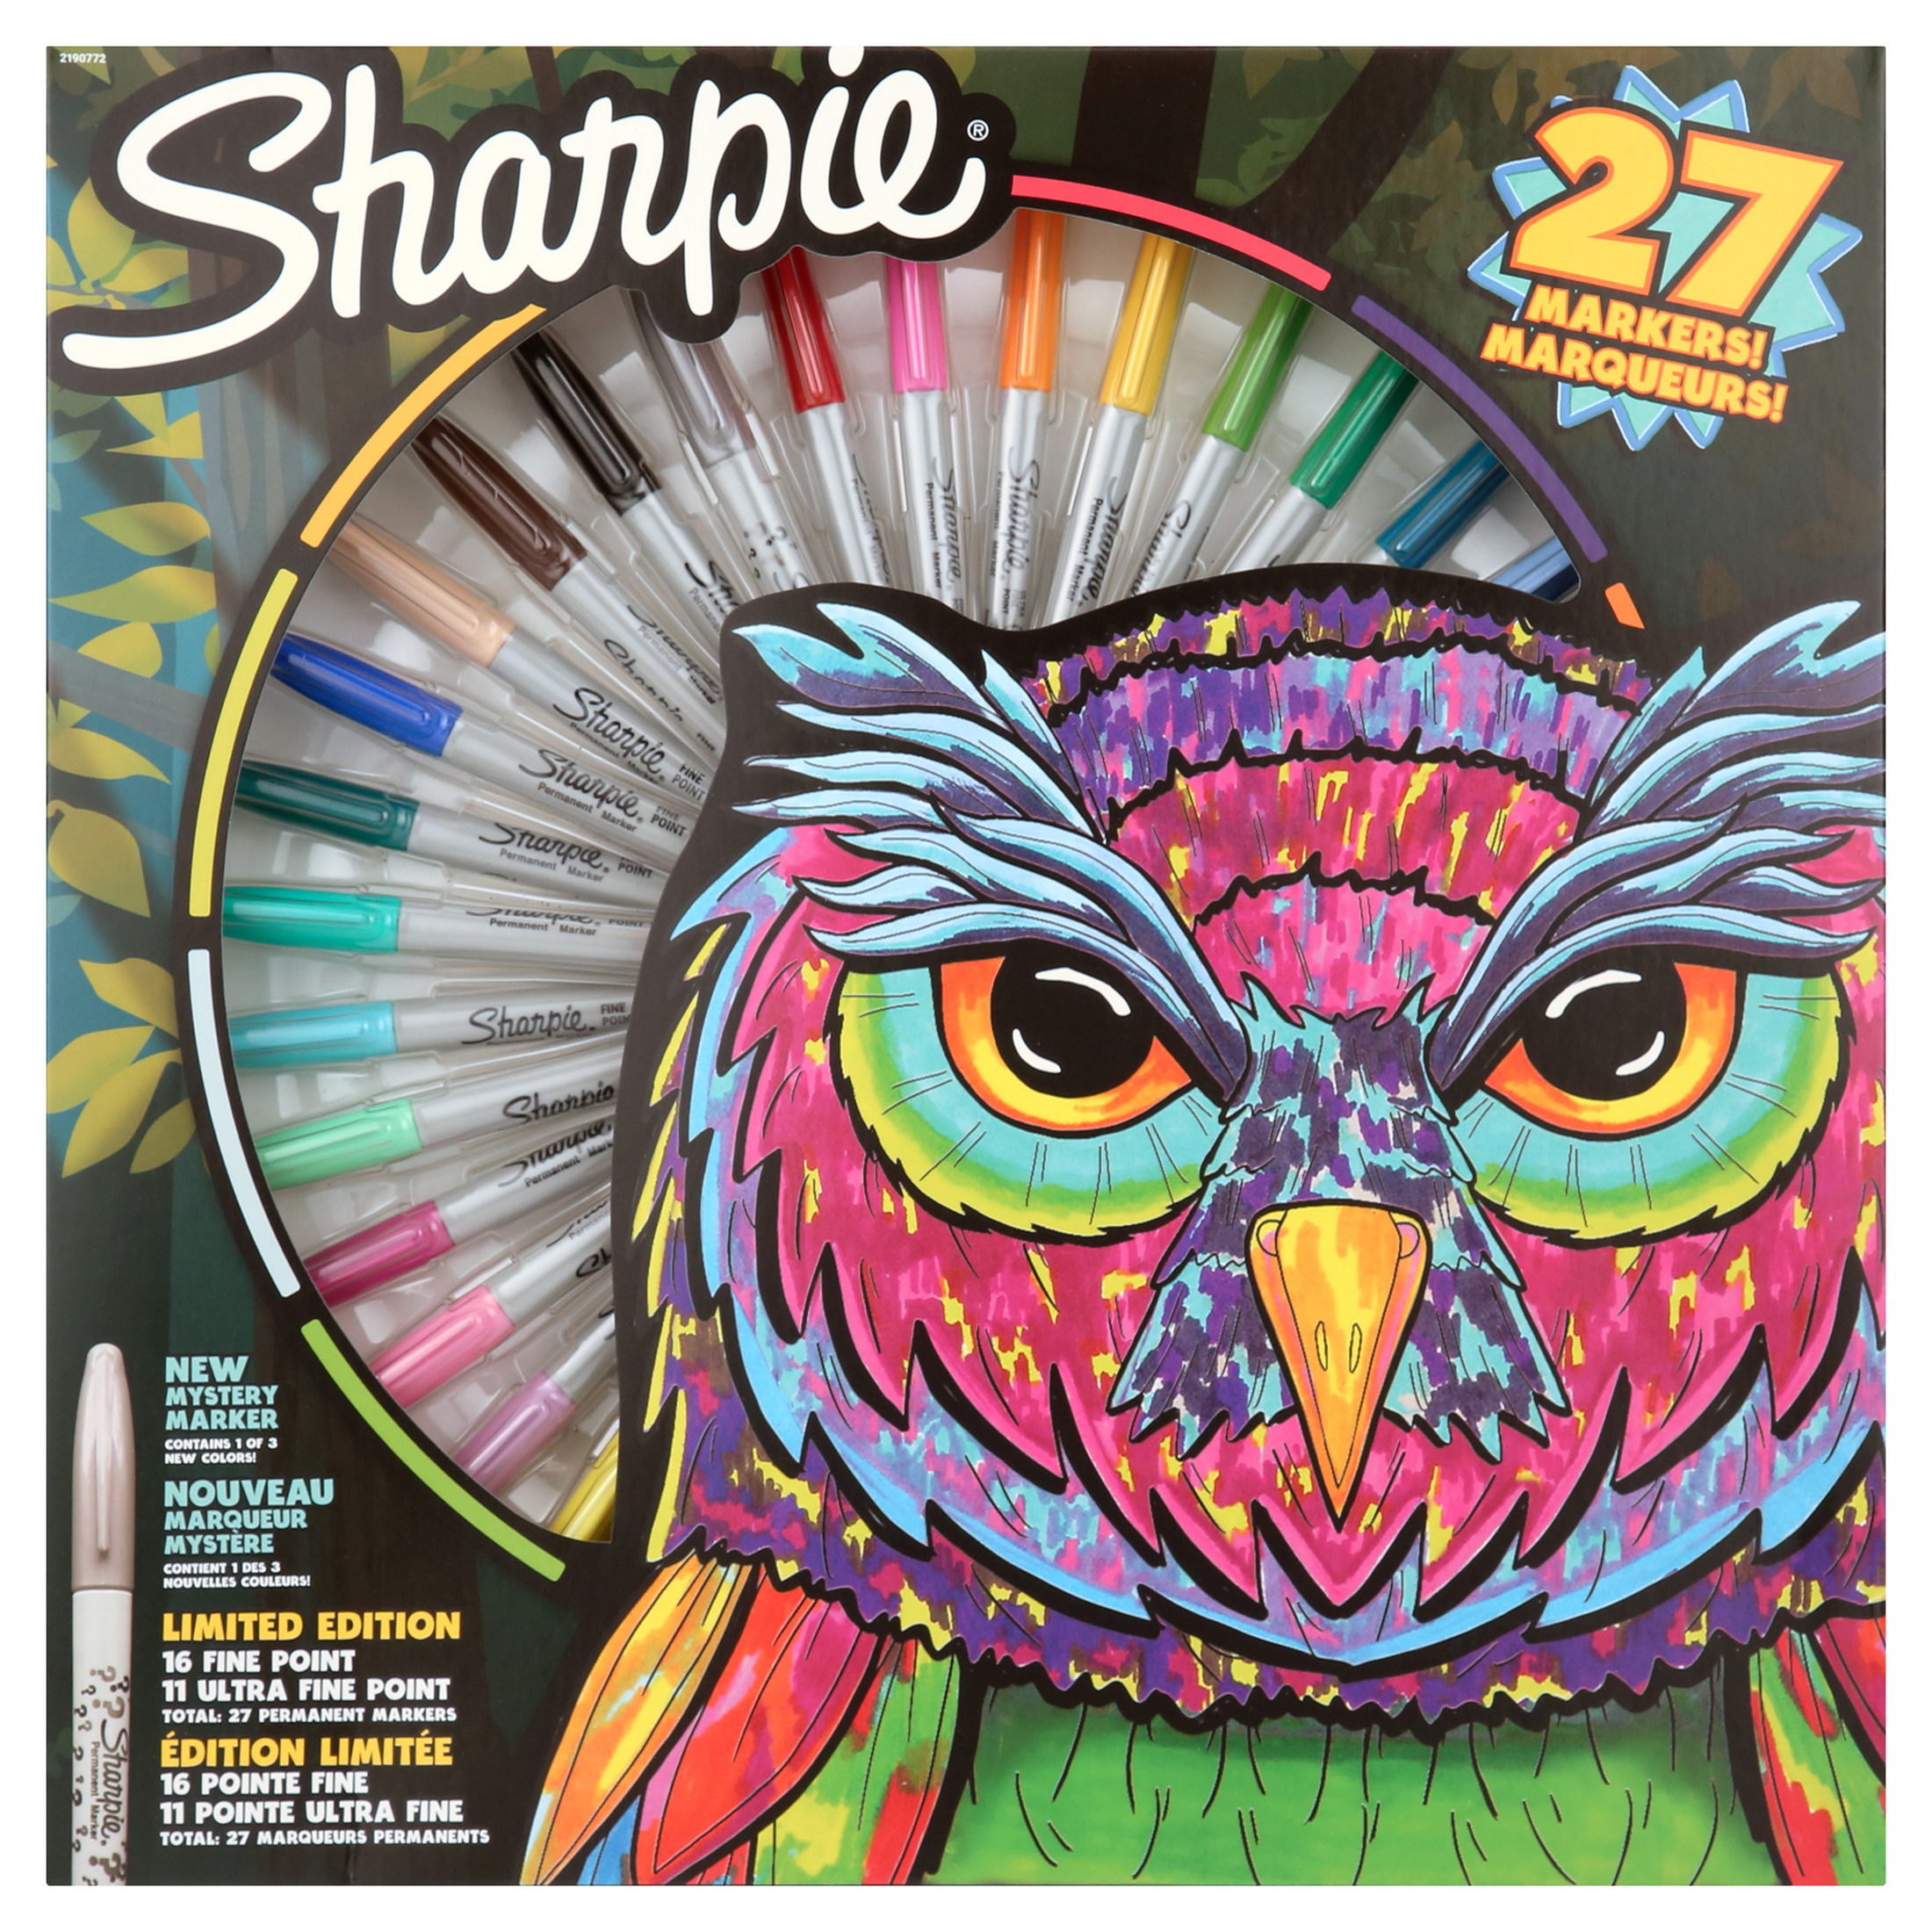 Sharpie Permanent Marker Assorted Pack, Plus 1 Mystery Color, Special Edition, 30 Count - image 3 of 7